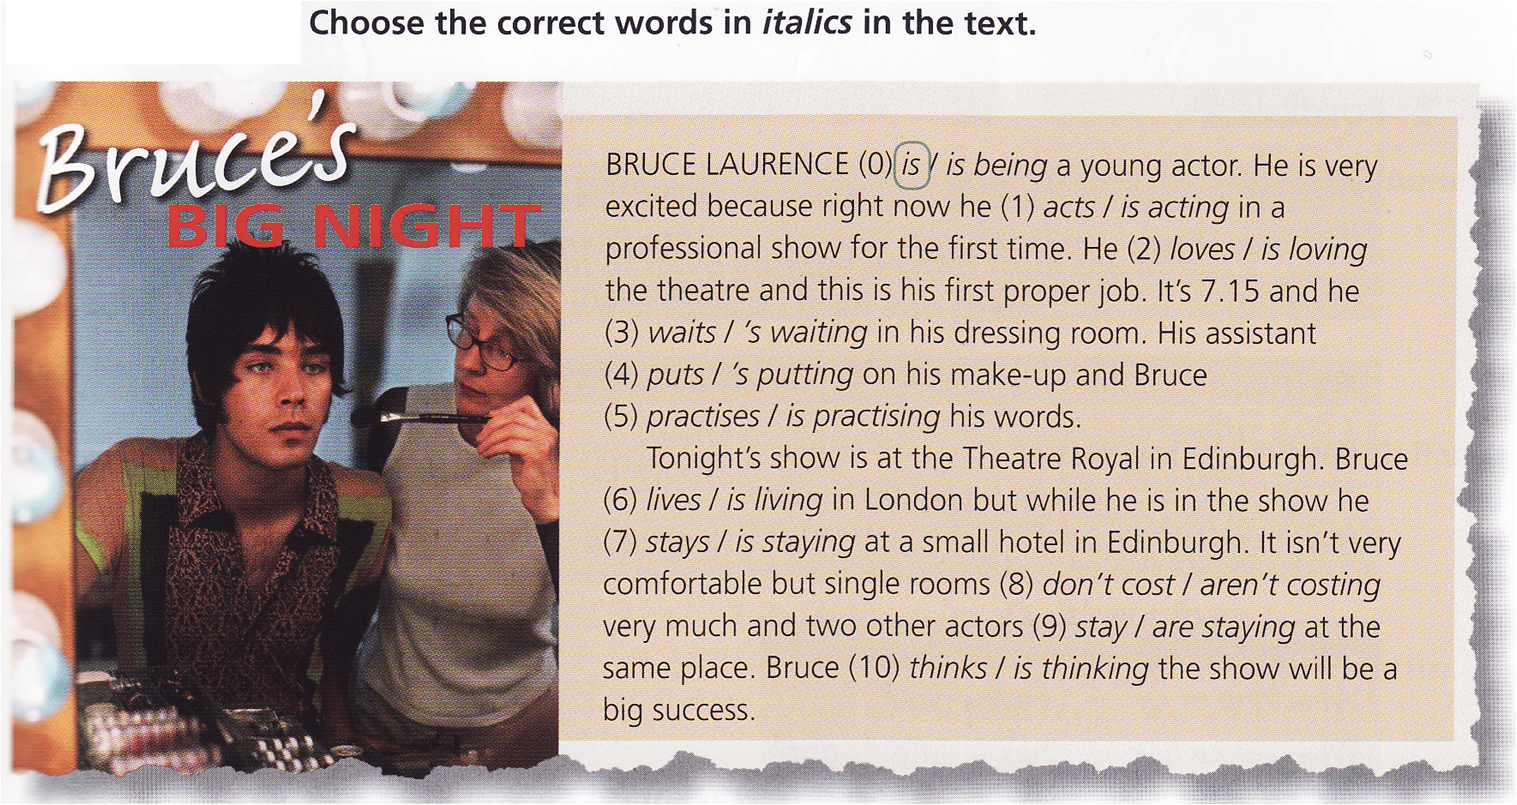 Брюс текст. Choose the correct Words in italics. Choose the correct Words in italics in the text Bruce Laurence ответы. Word in italics. Choose the correct Words in italics in the text Bruce Laurence is a young actor. He is very.